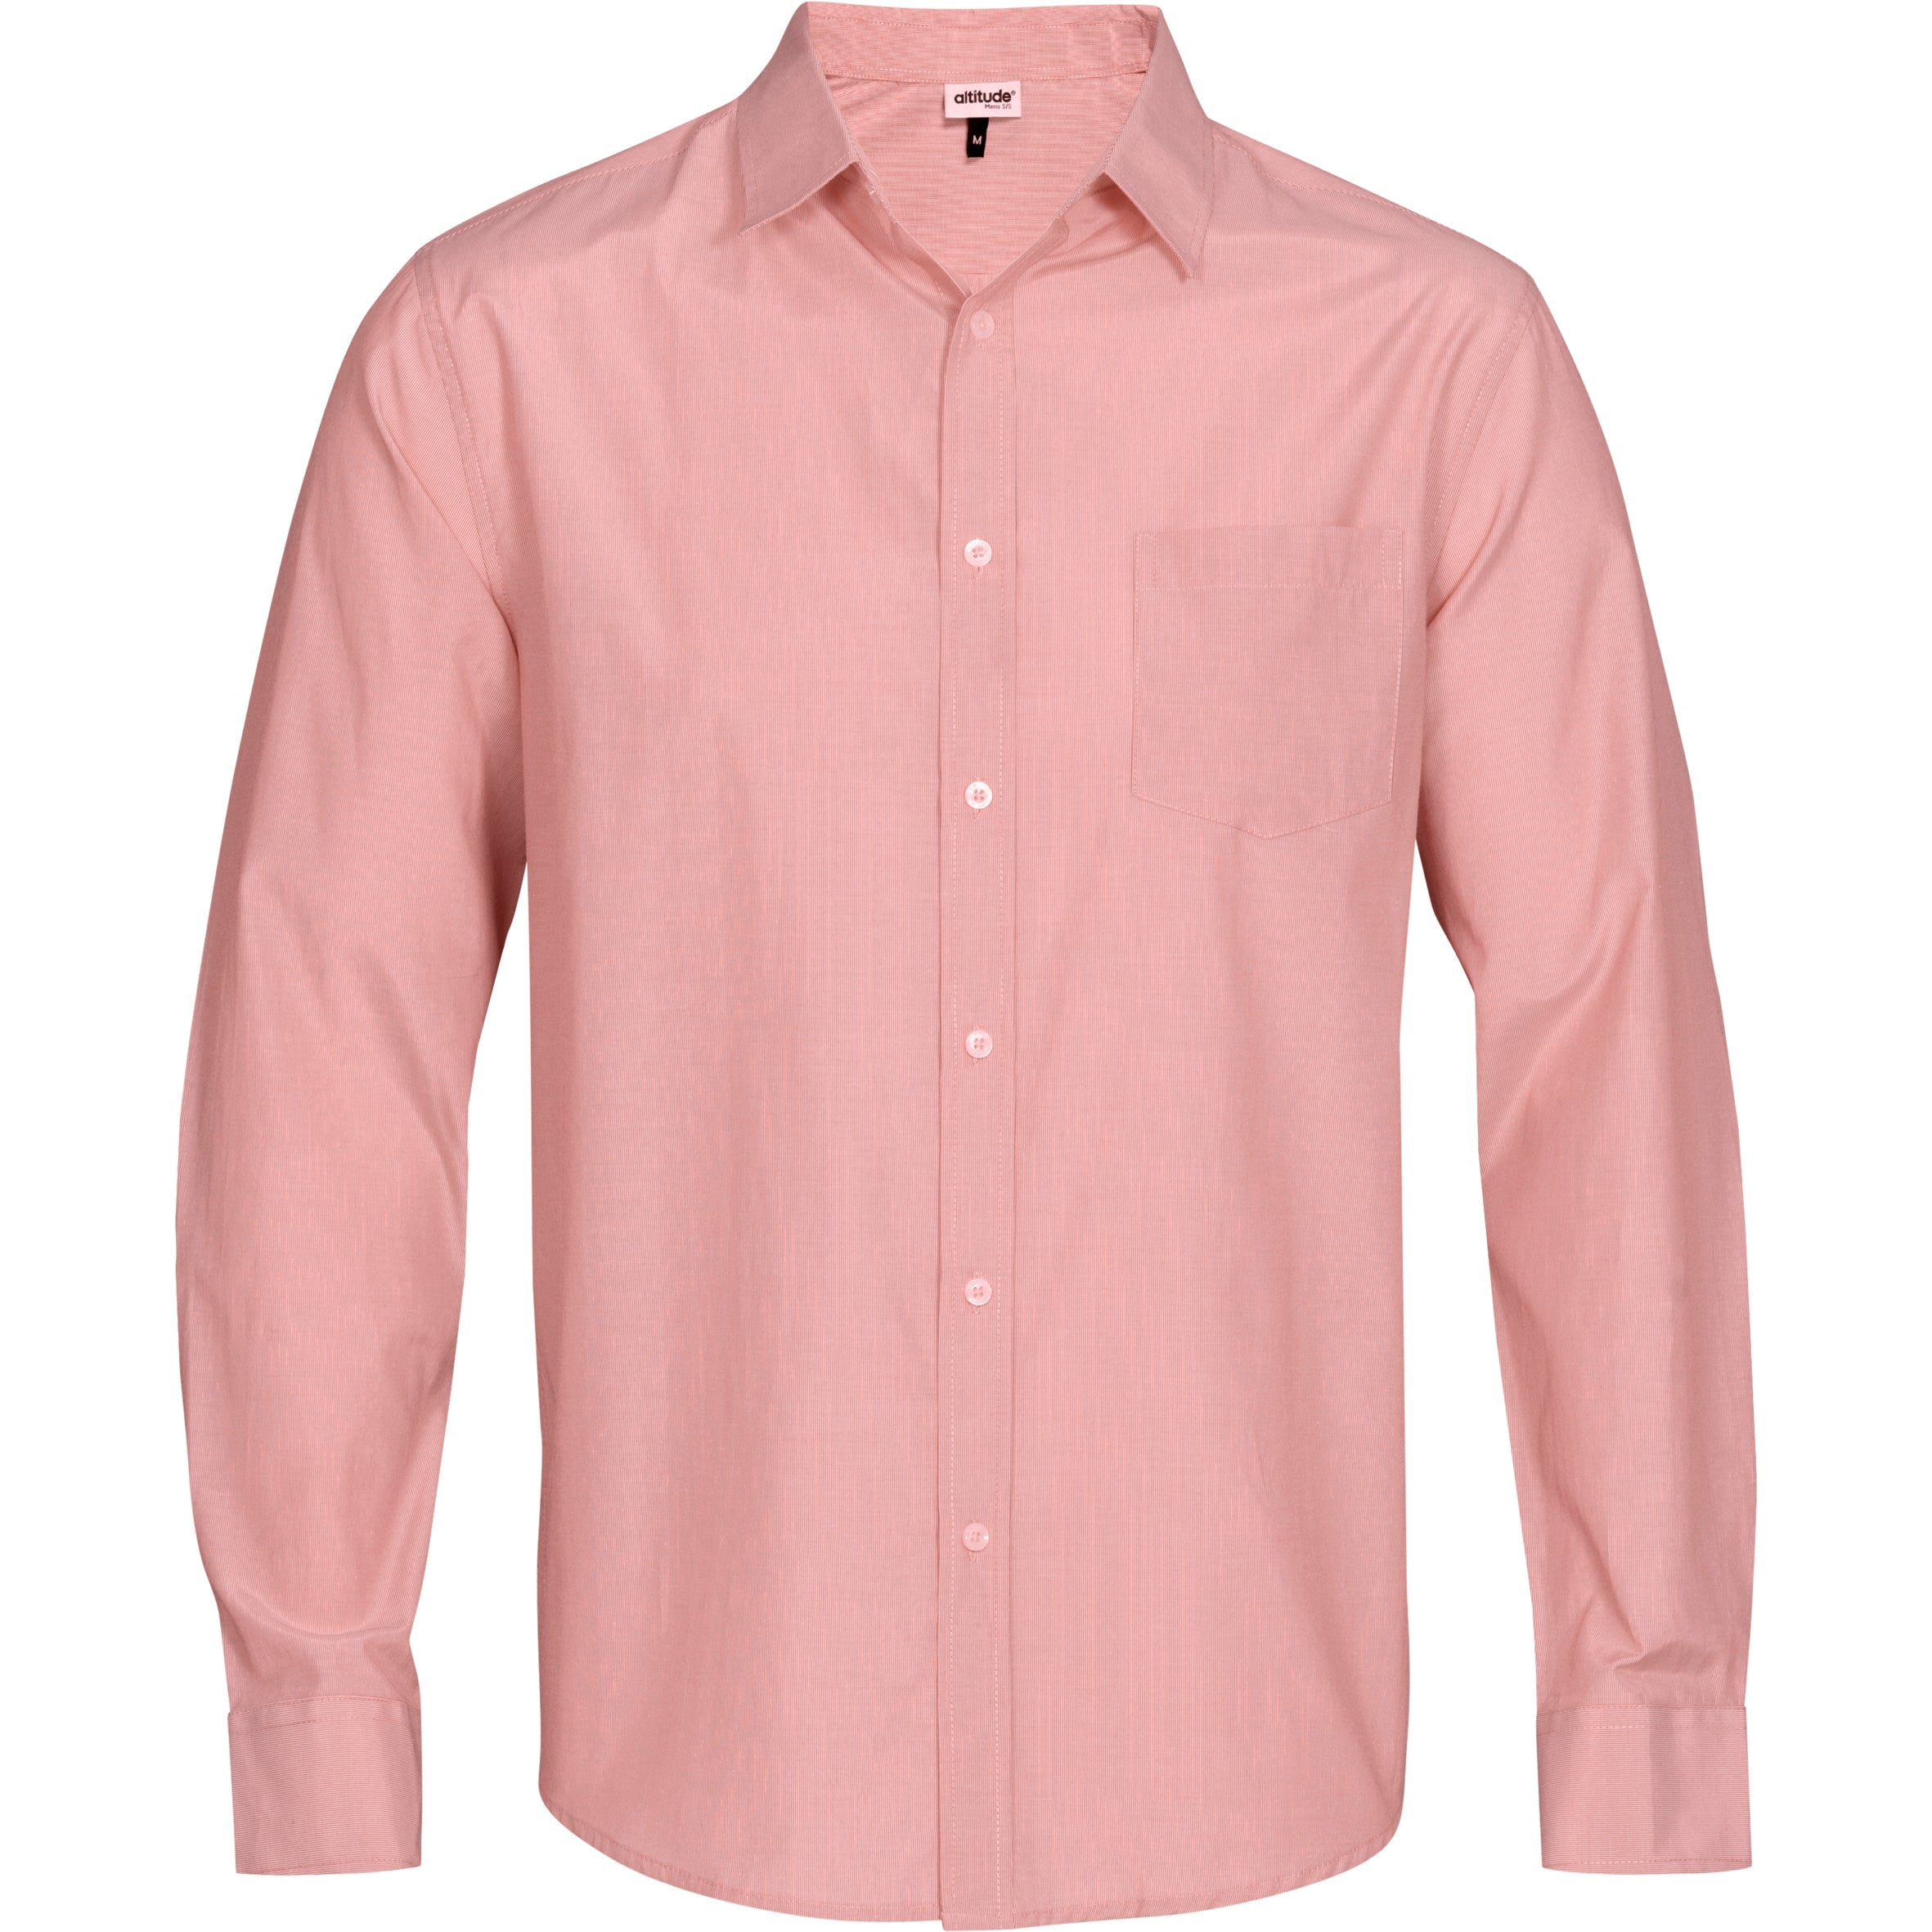 Mens Long Sleeve Portsmouth Shirt - Red Only-